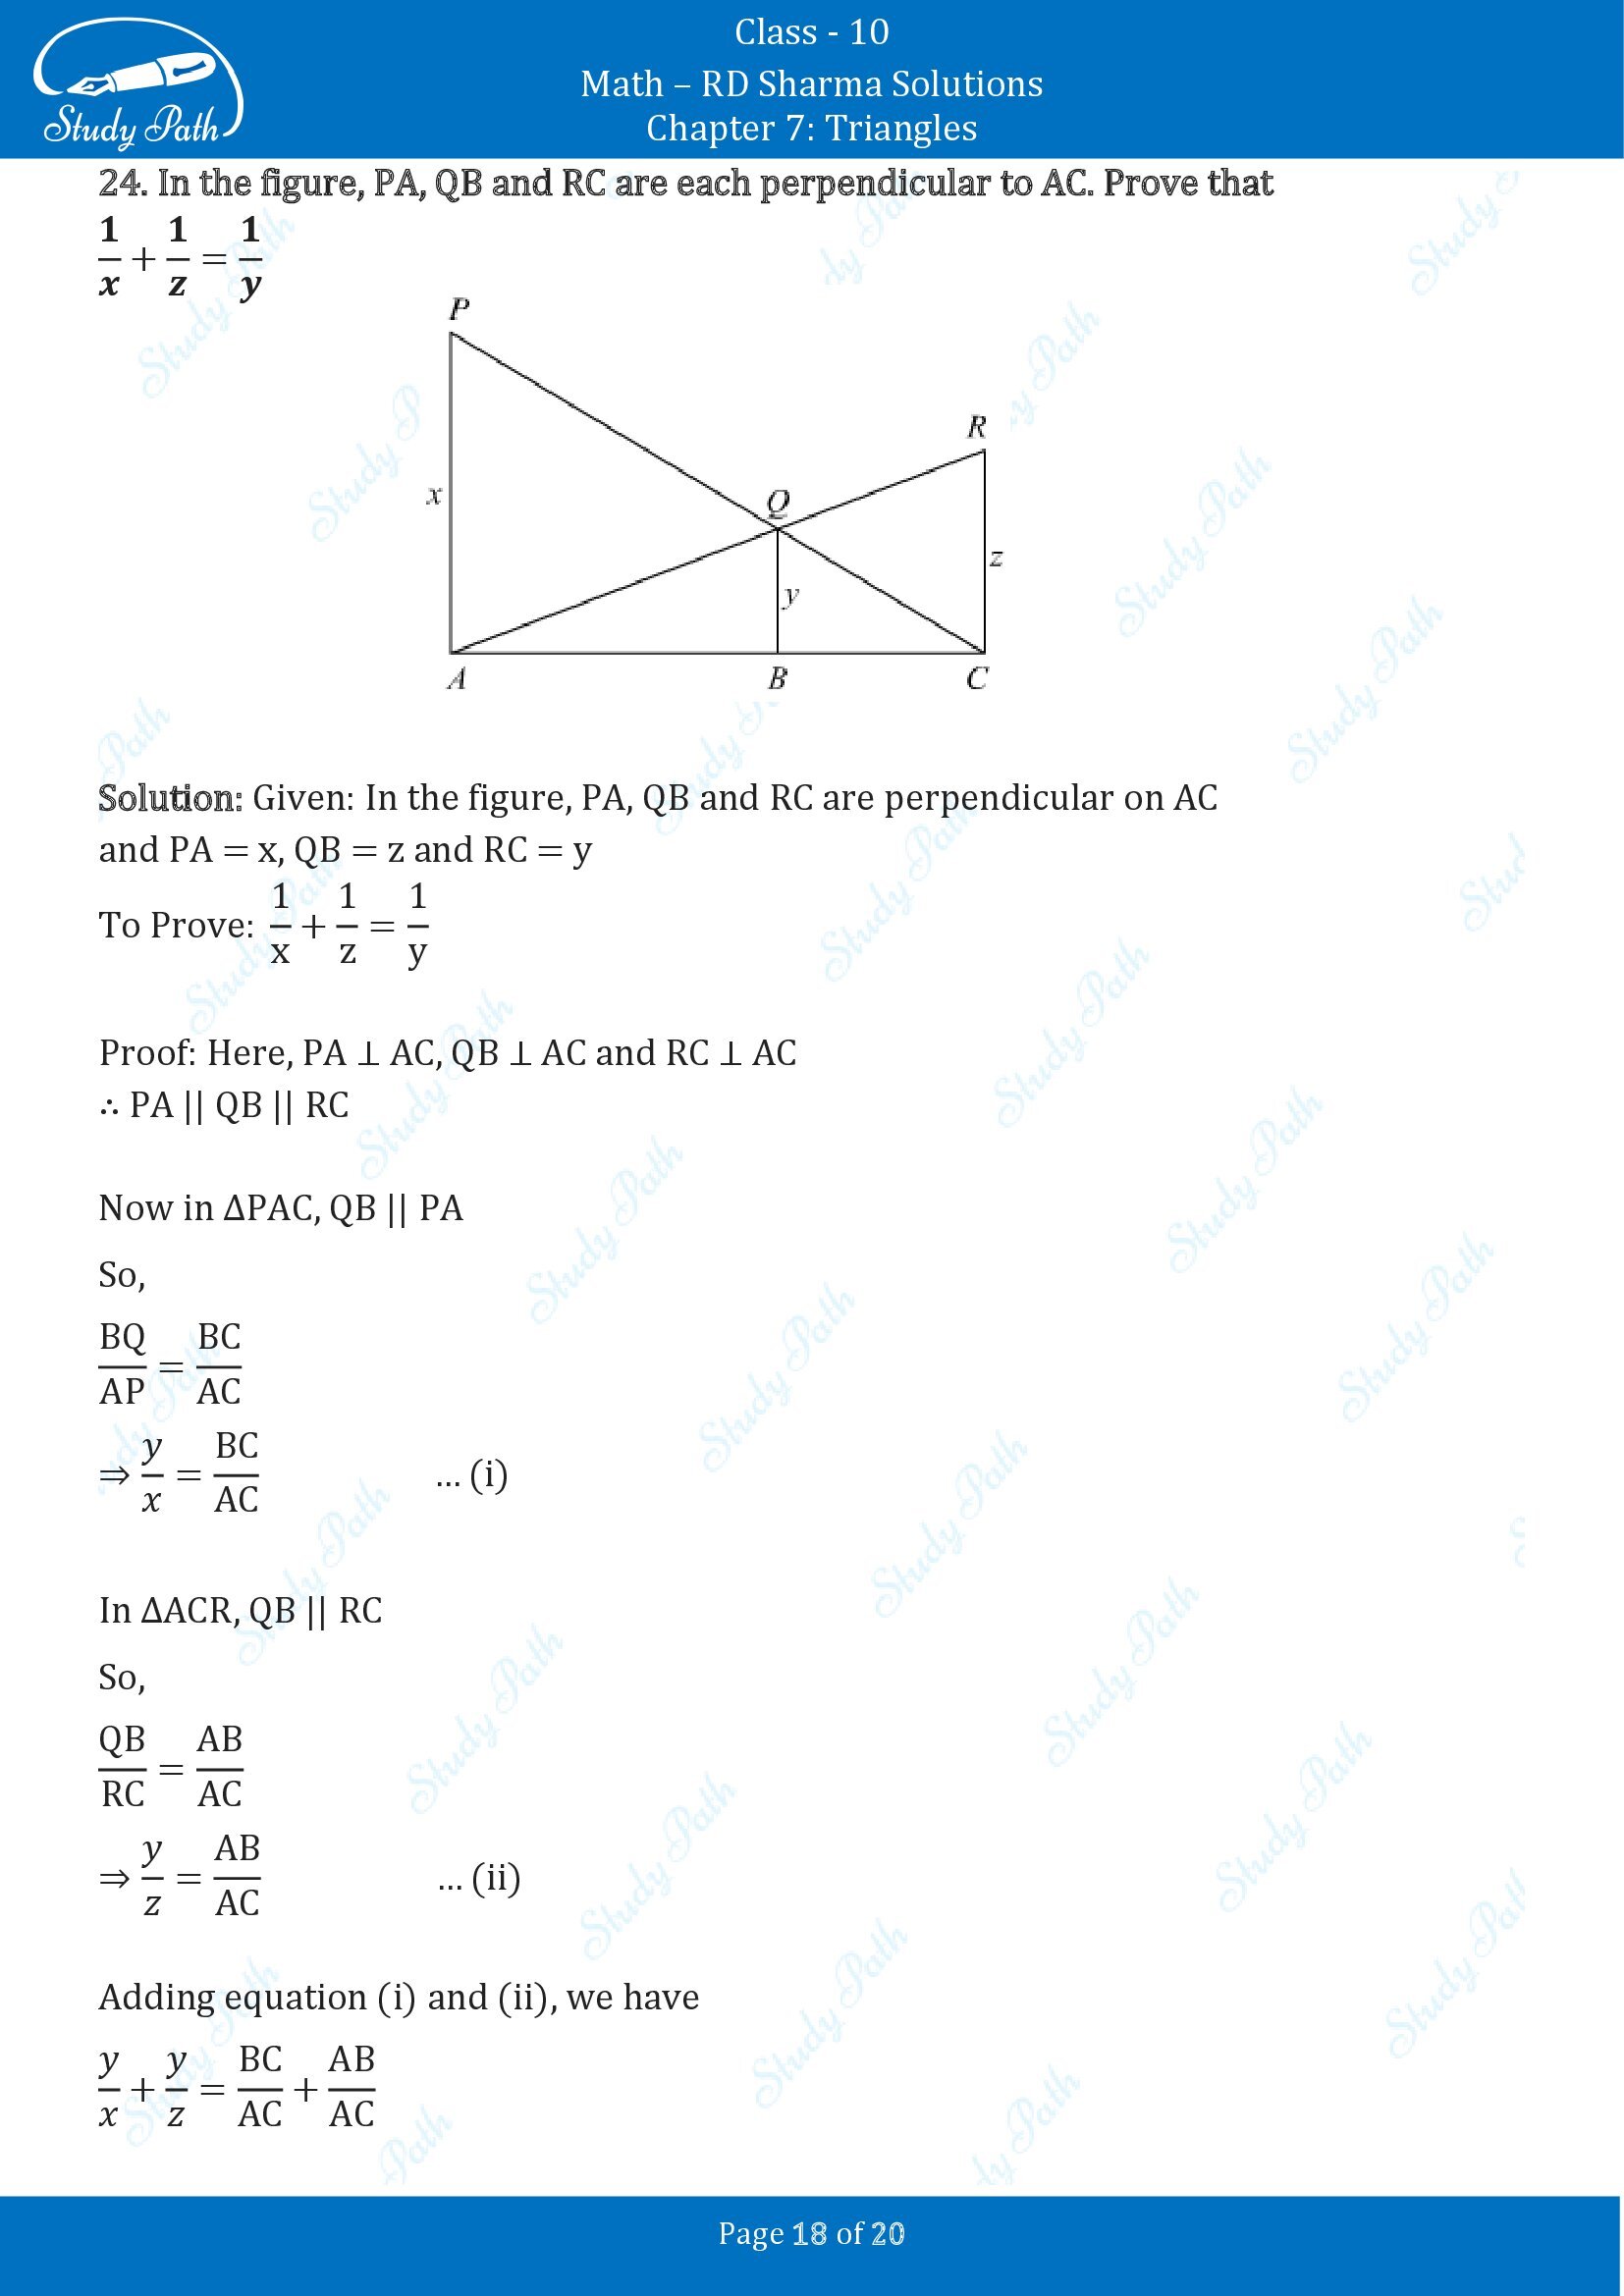 RD Sharma Solutions Class 10 Chapter 7 Triangles Exercise 7.5 00018